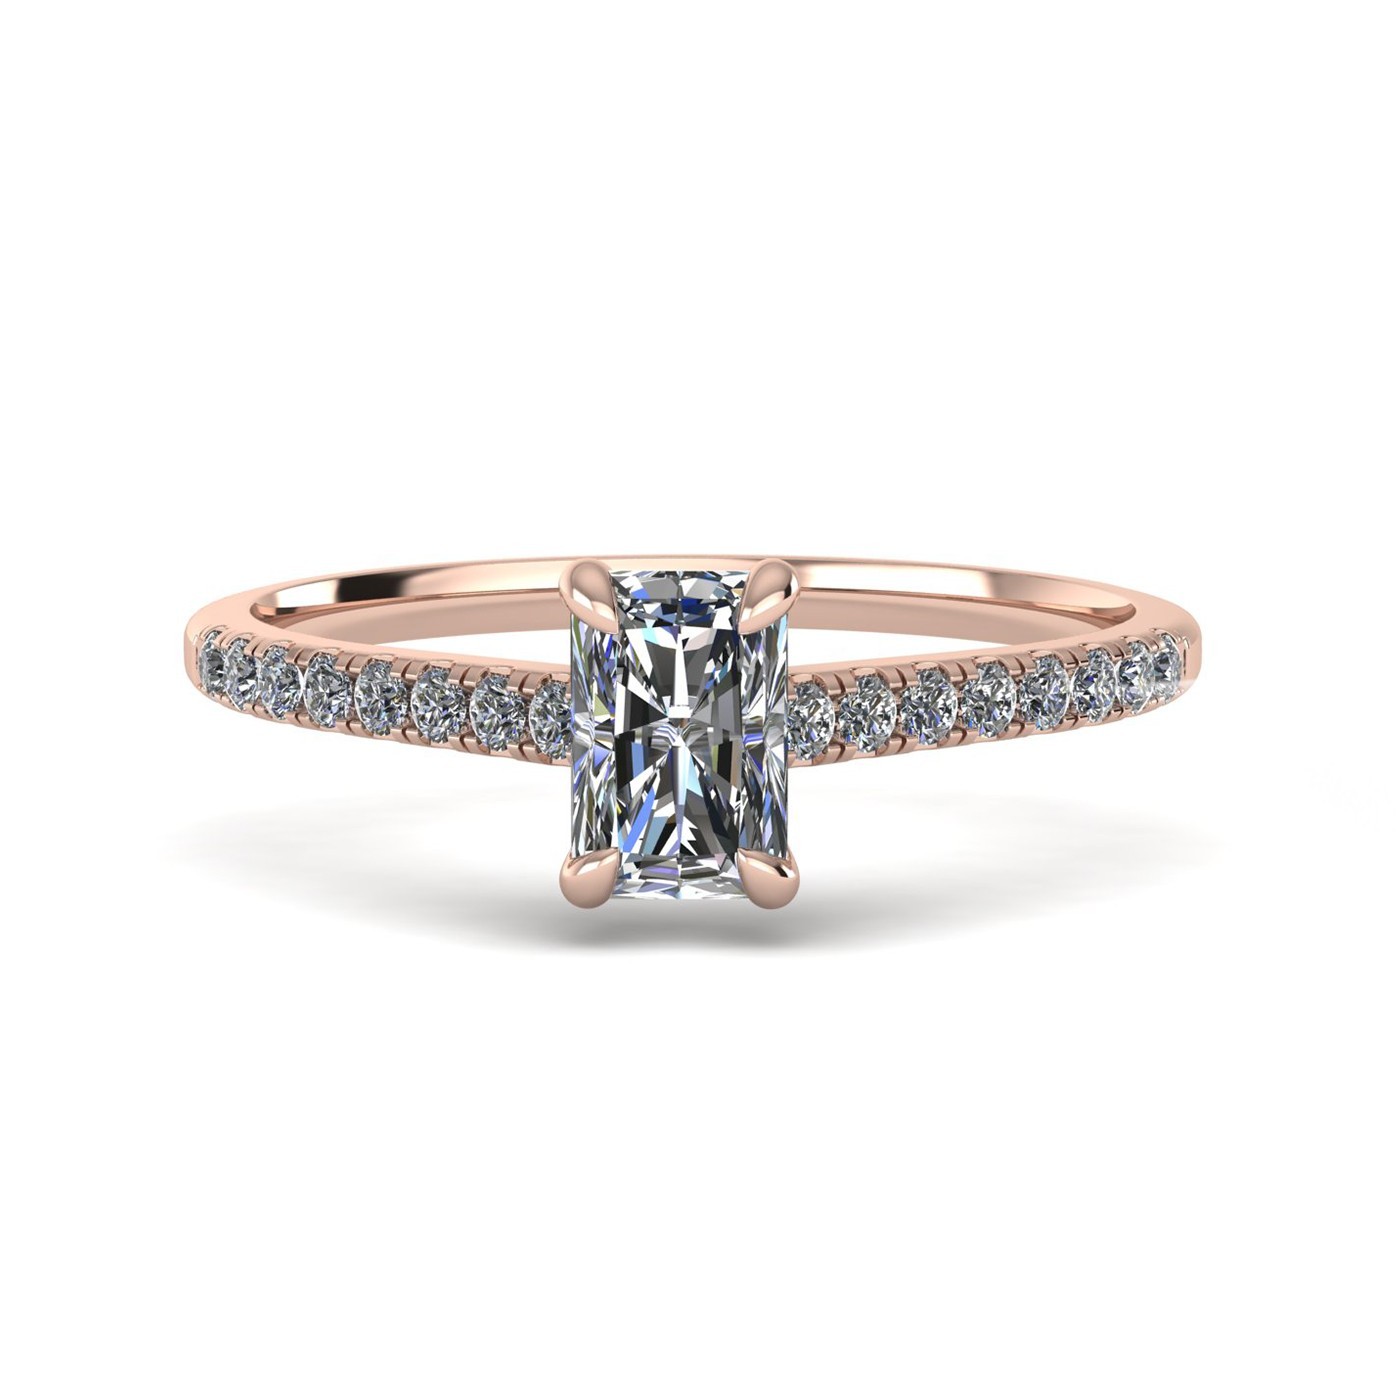 18k rose gold  0,50 ct 4 prongs radiant cut diamond engagement ring with whisper thin pavÉ set band